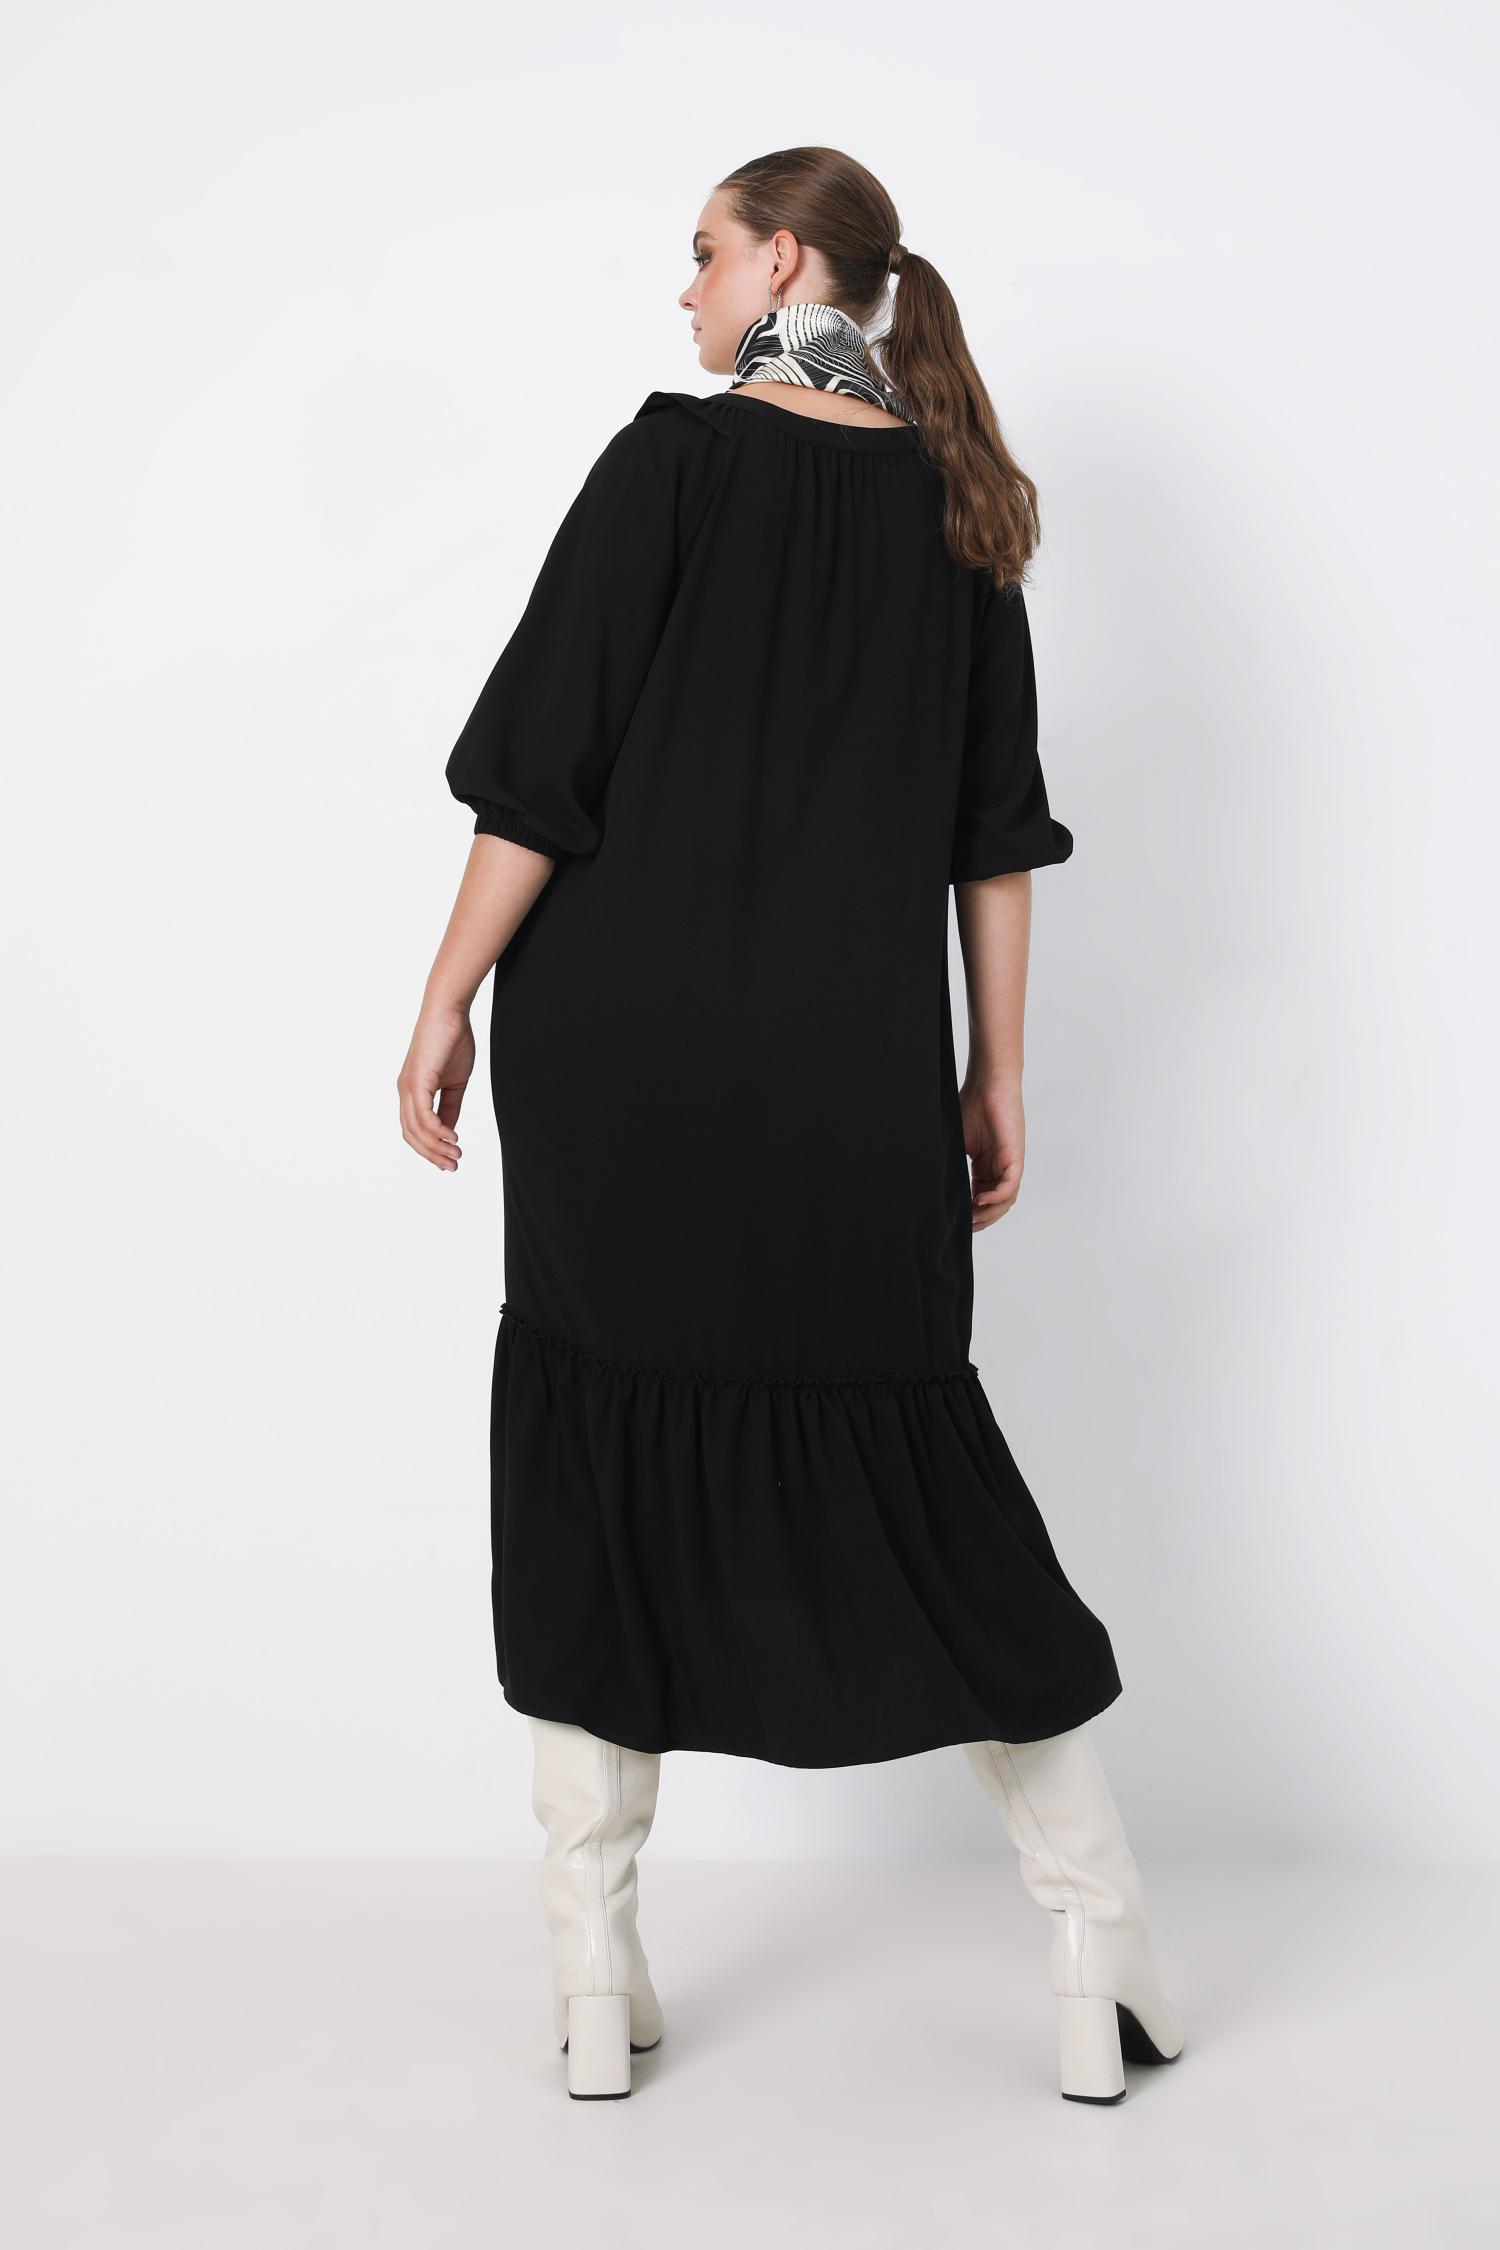 long plain dress with wide ruffle at the bottom (expedition June 15/20)